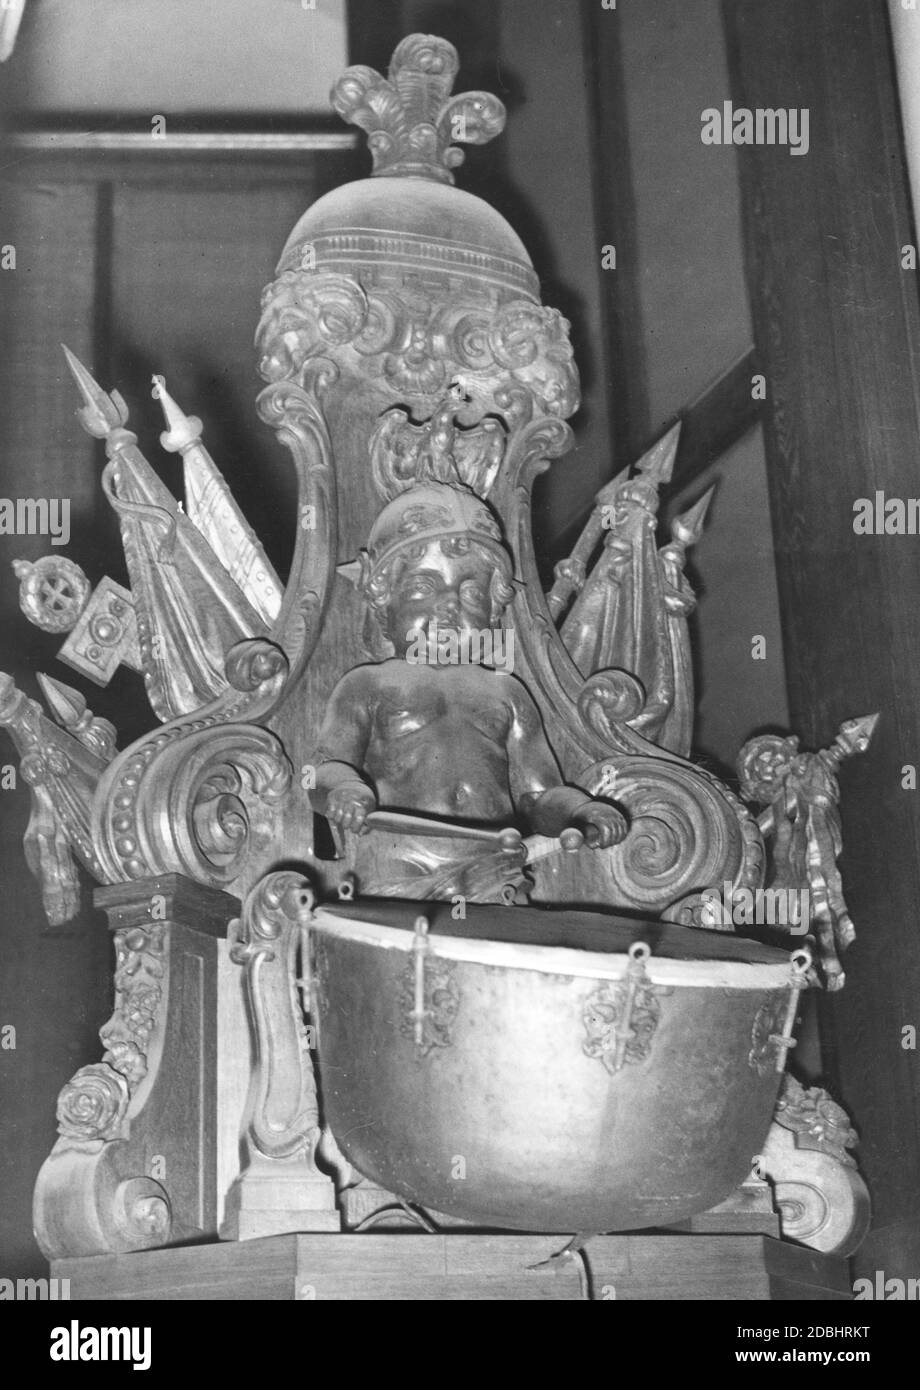 The photograph shows a sculpture with a drummer in the Garnisonkirche in Berlin-Mitte. Undated photo, probably taken around 1930. Stock Photo